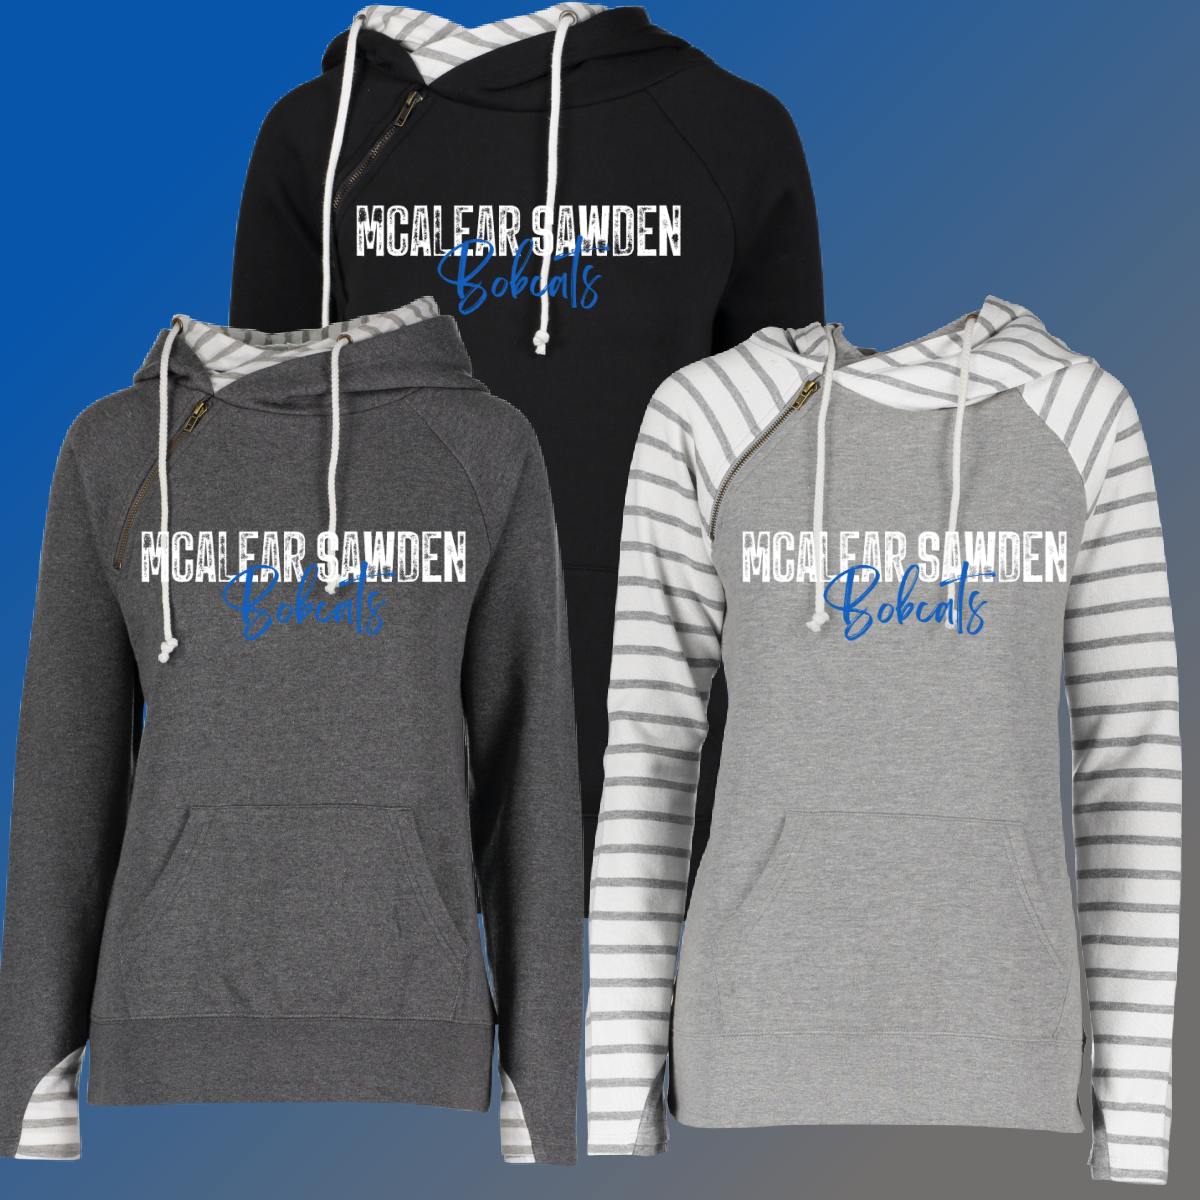 McAlear Sawden Bobcats - Simple Stamped Double Hooded Sweatshirt